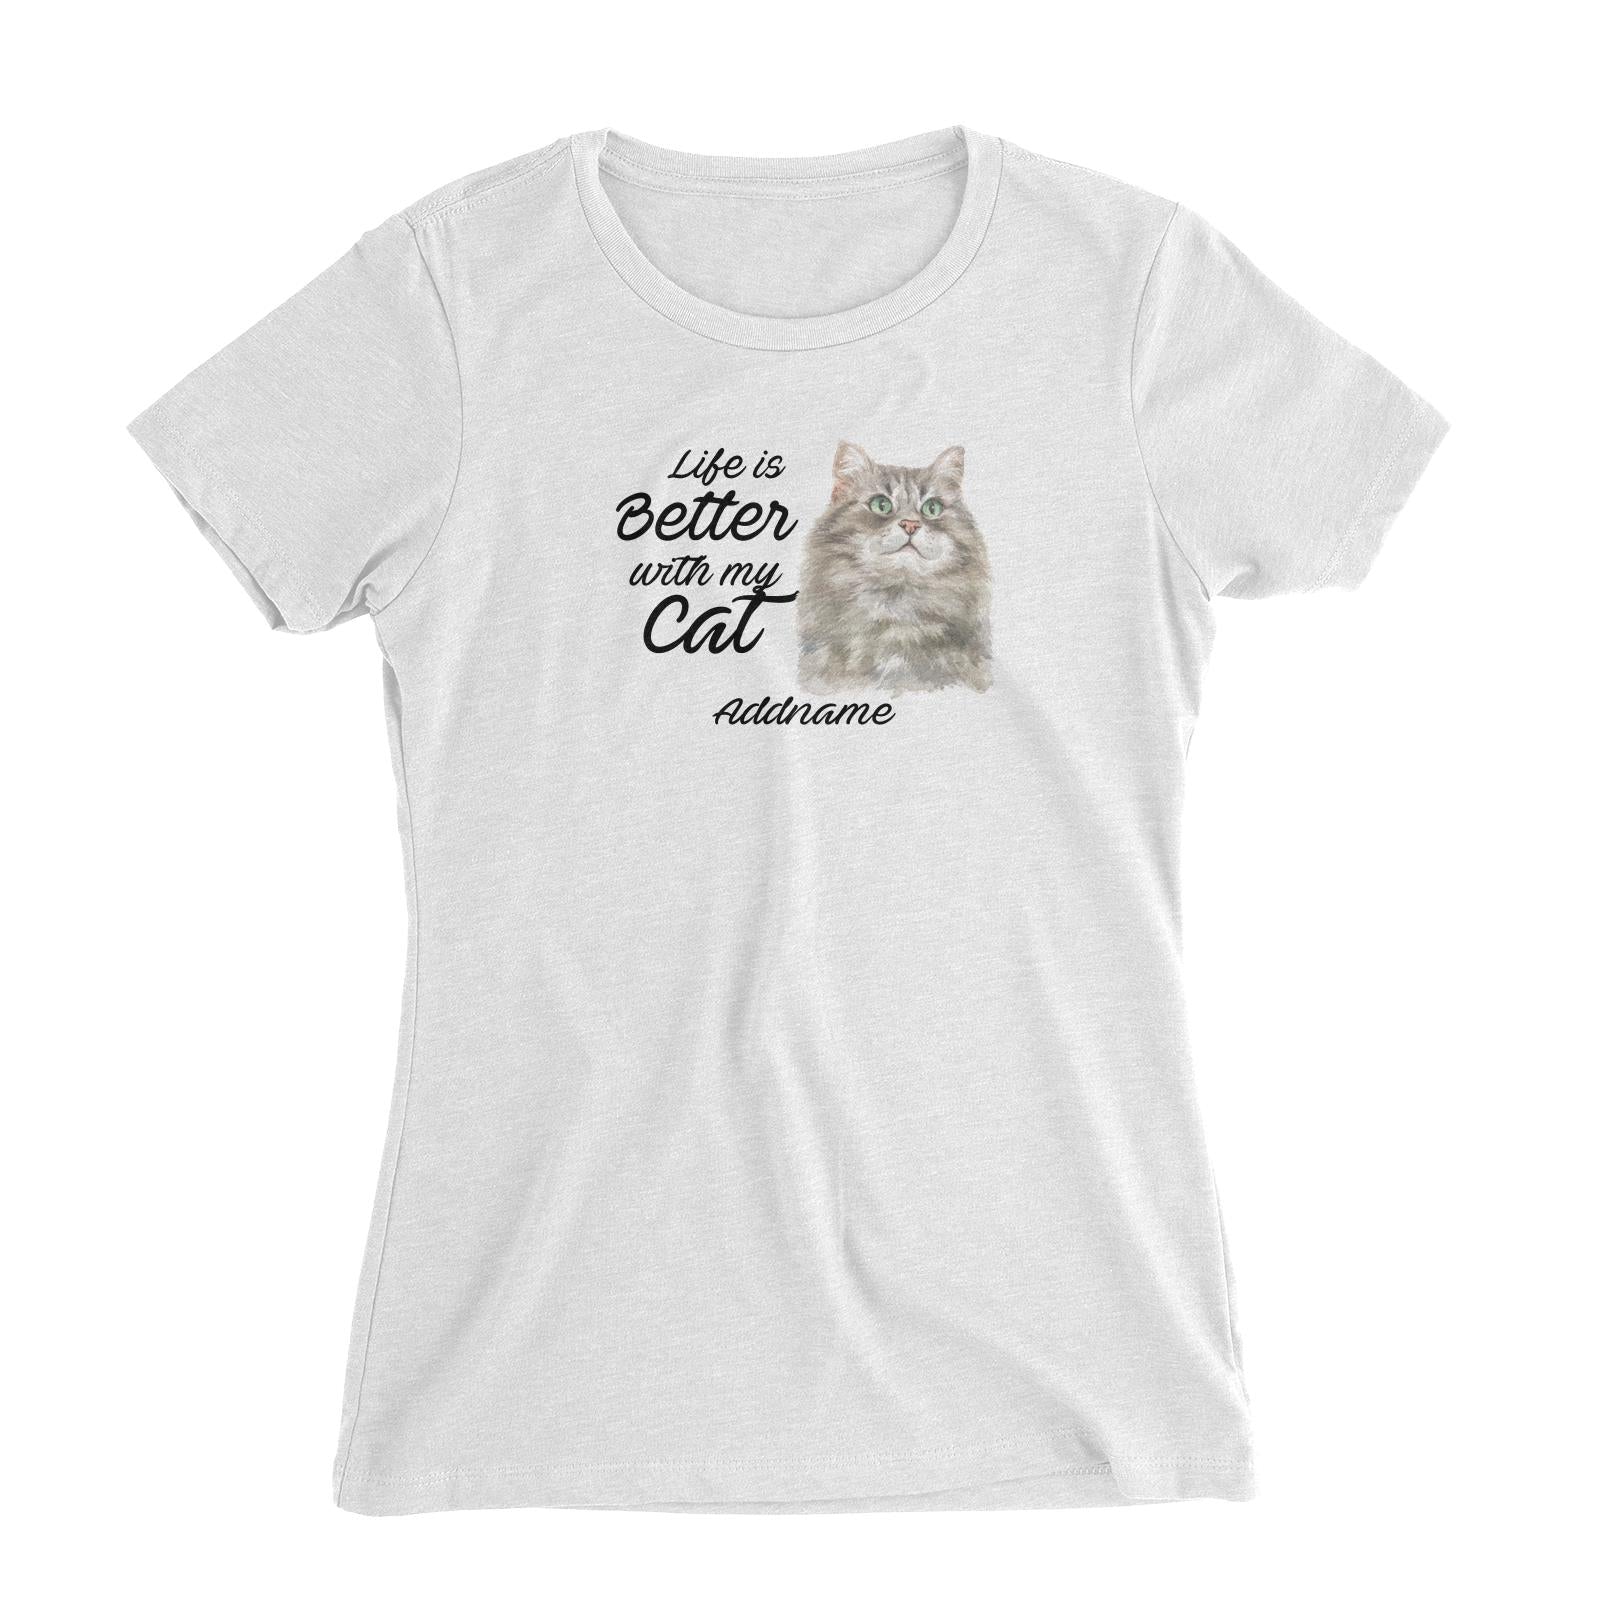 Watercolor Life is Better With My Cat Siberian Cat Grey Addname Women's Slim Fit T-Shirt